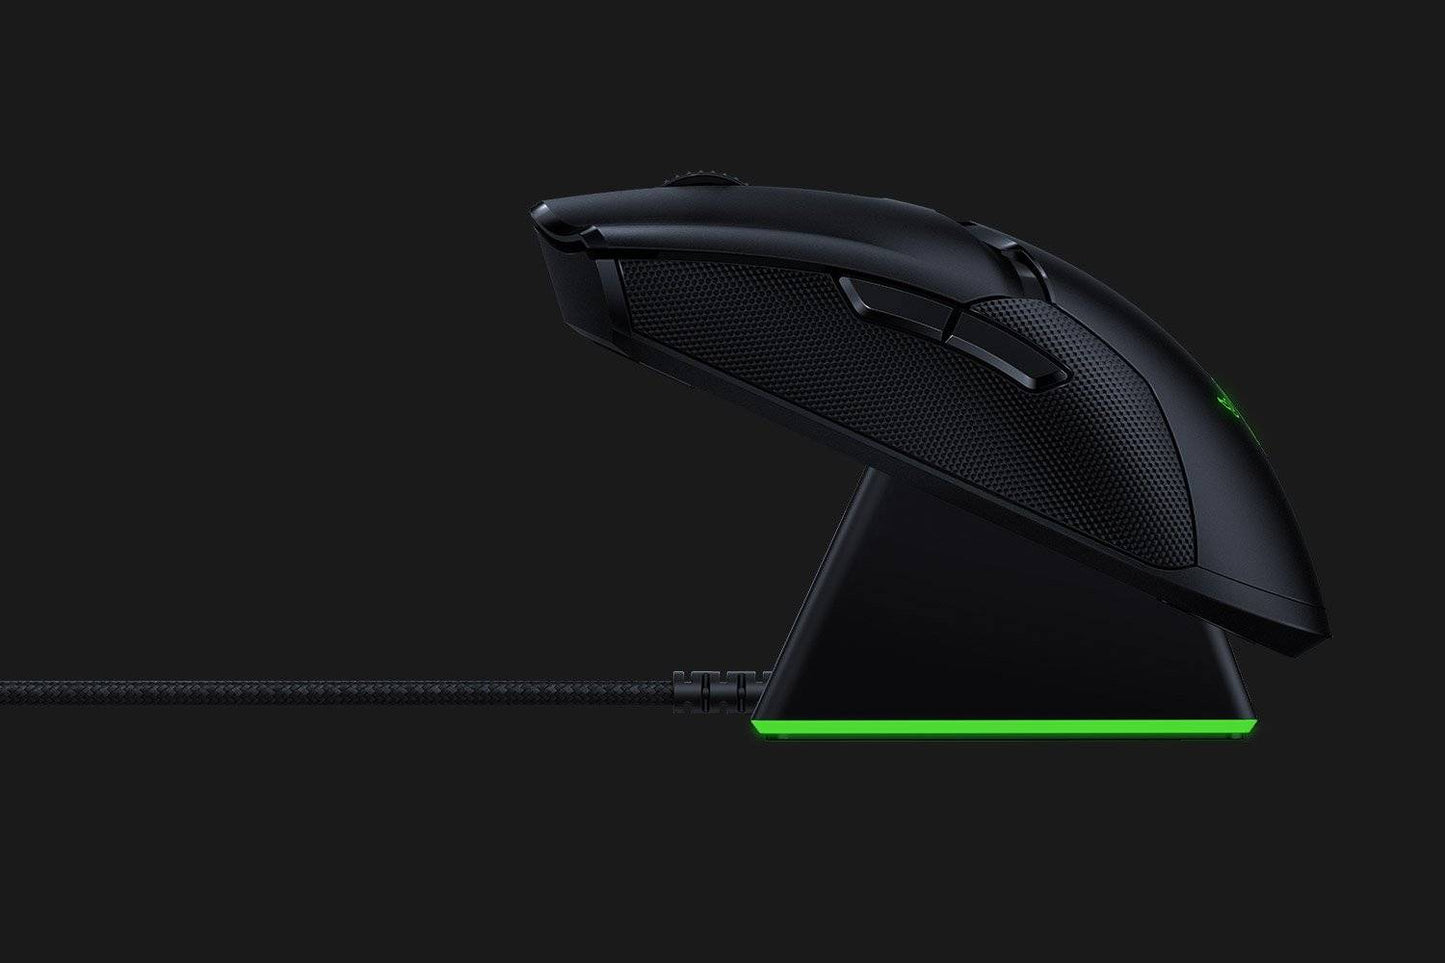 Razer Viper Ultimate Wireless Gaming Mouse with Charging Dock Black